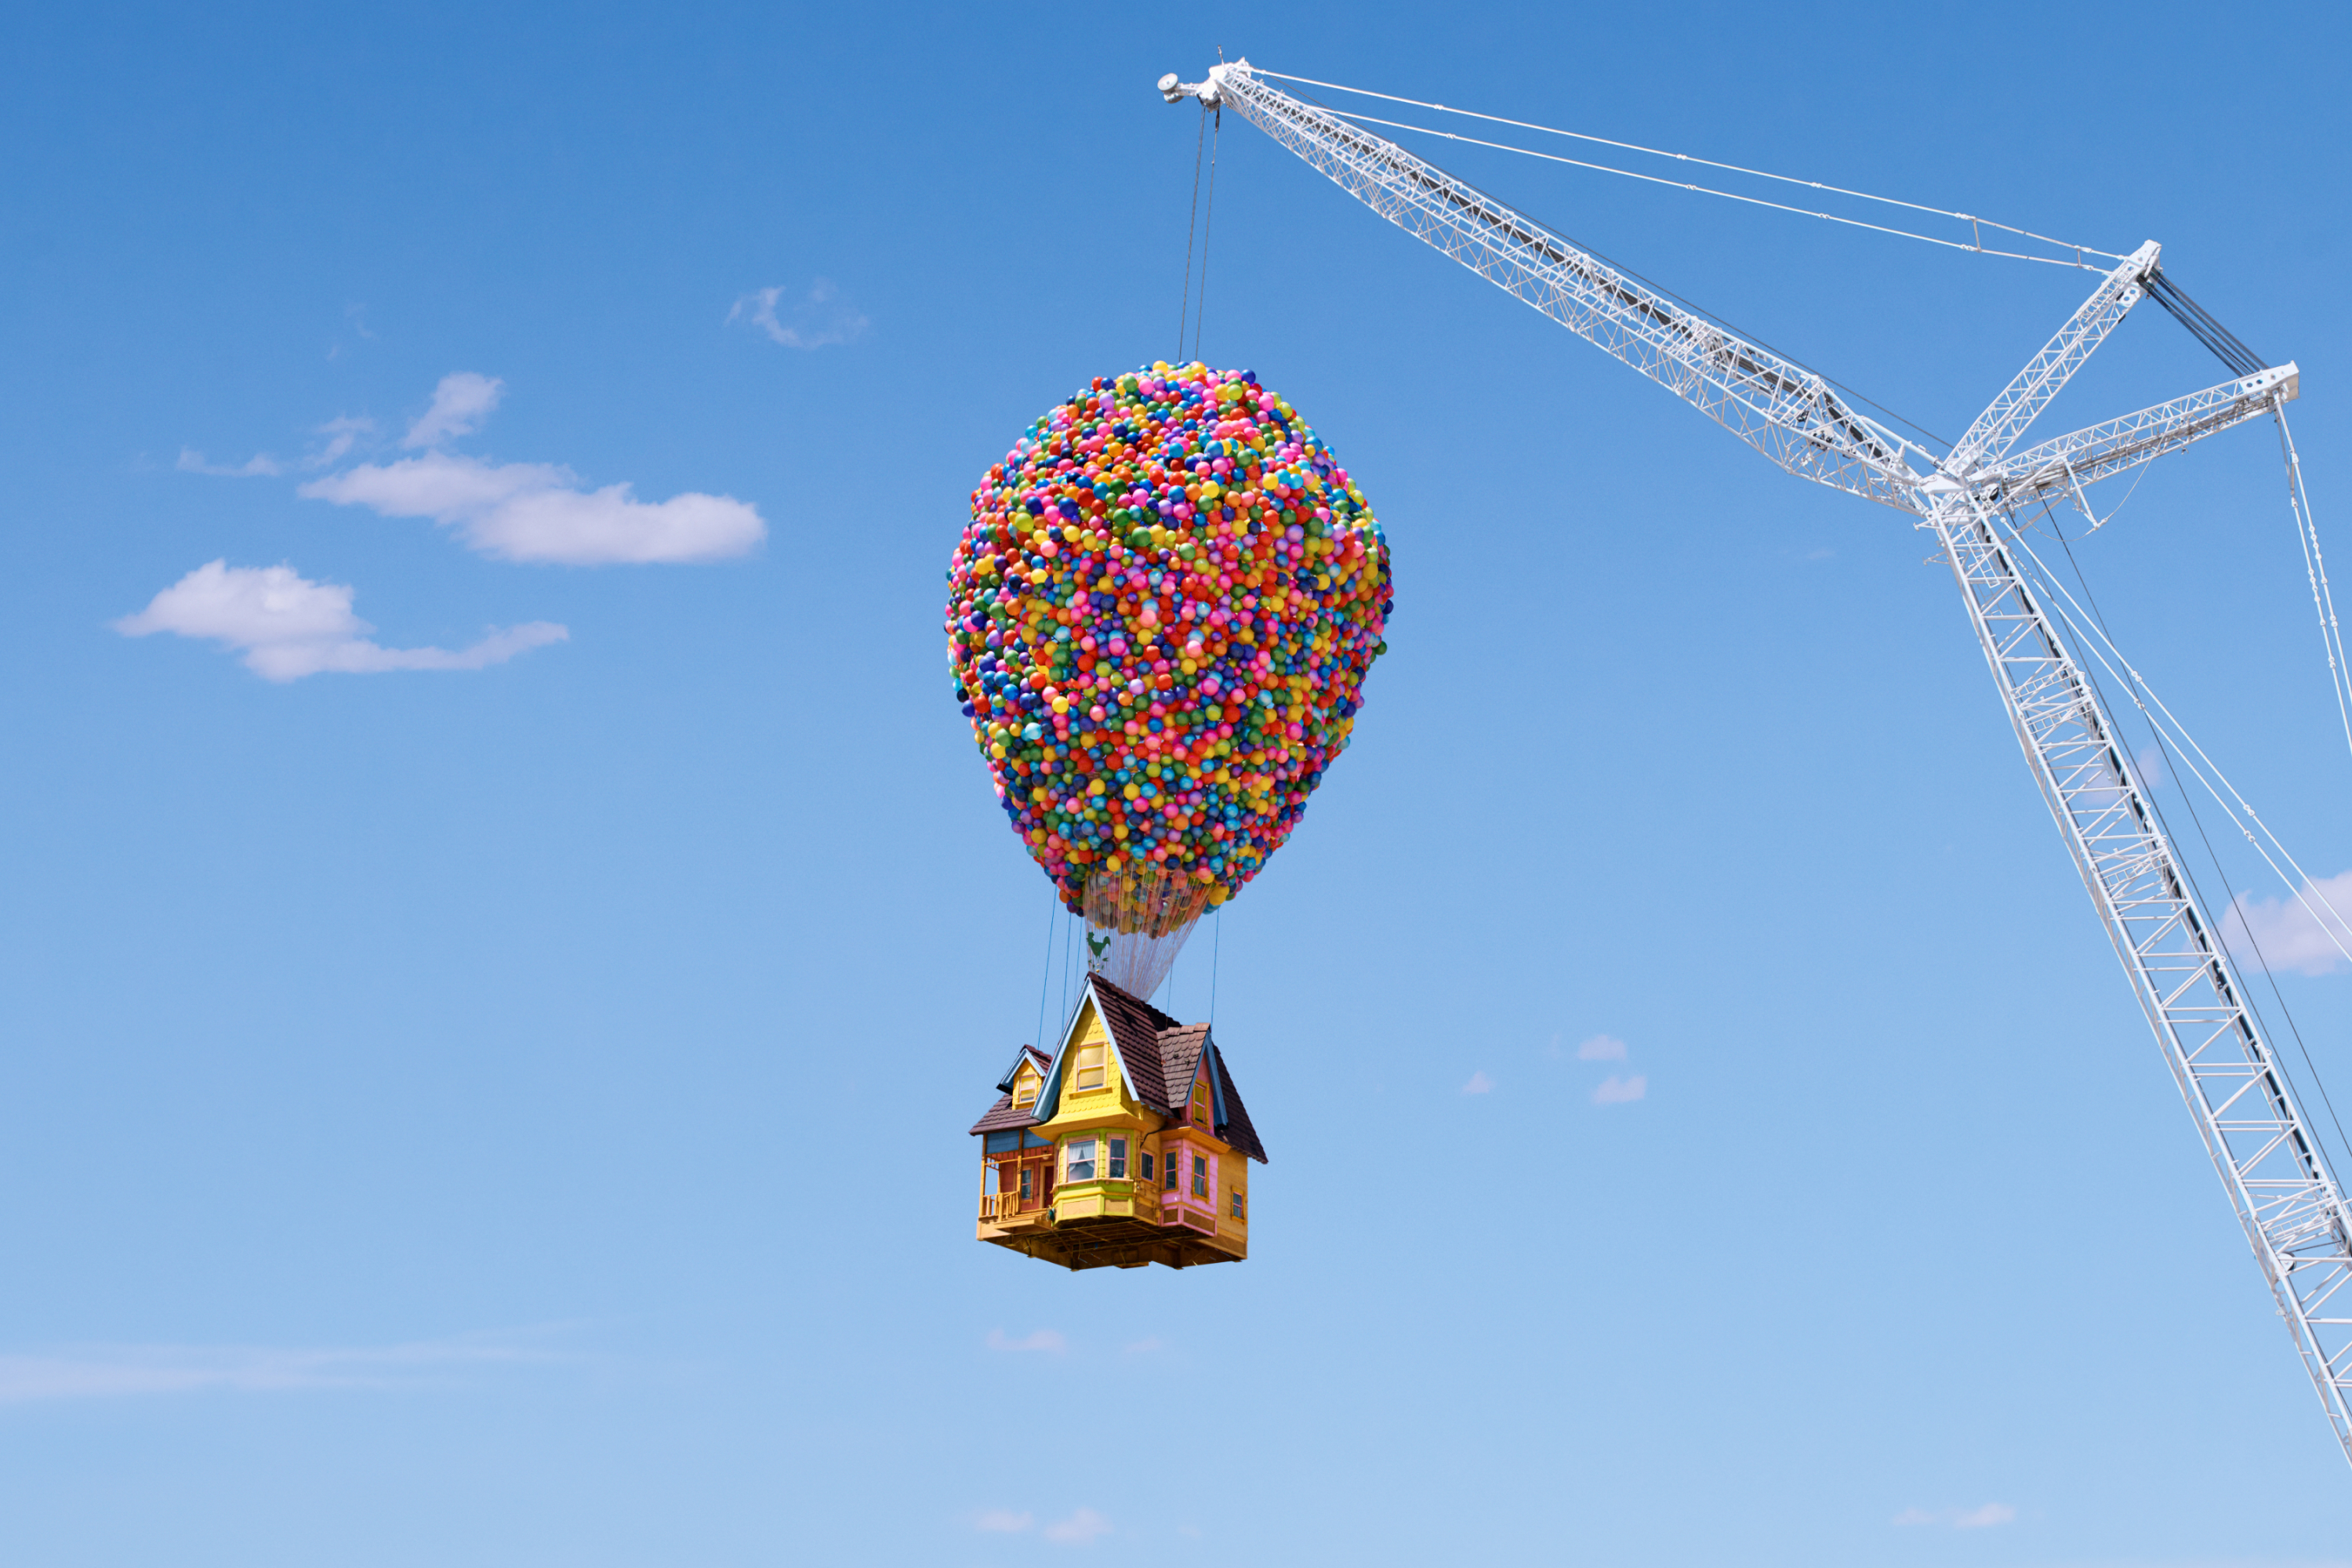 A house suspended by balloons, being lifted by a metal crane, high in a bright blue sky. 